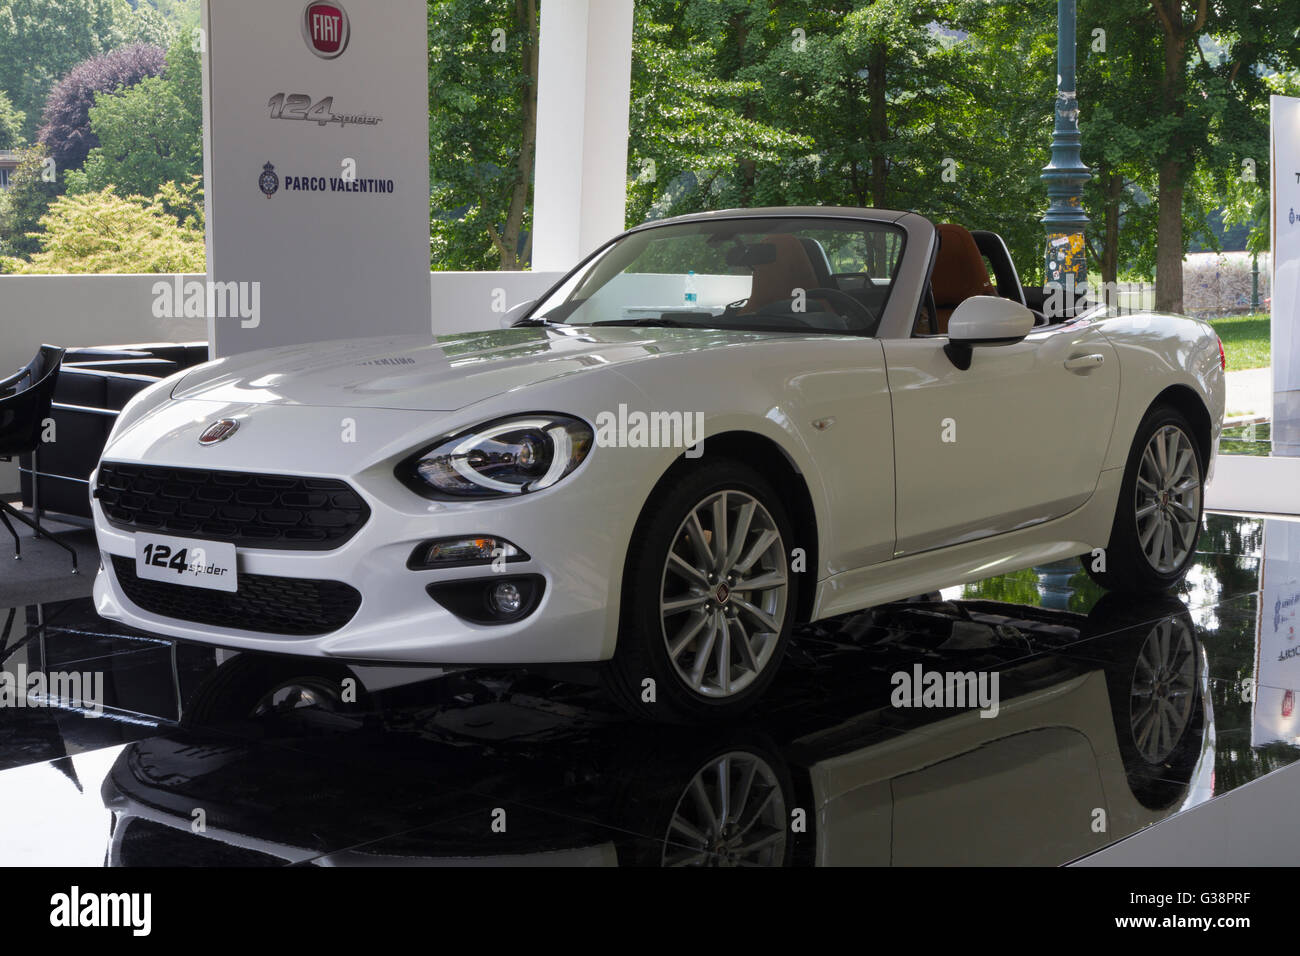 Turin, Italy, 8th June 2016. A Fiat 124 Spider Stock Photo